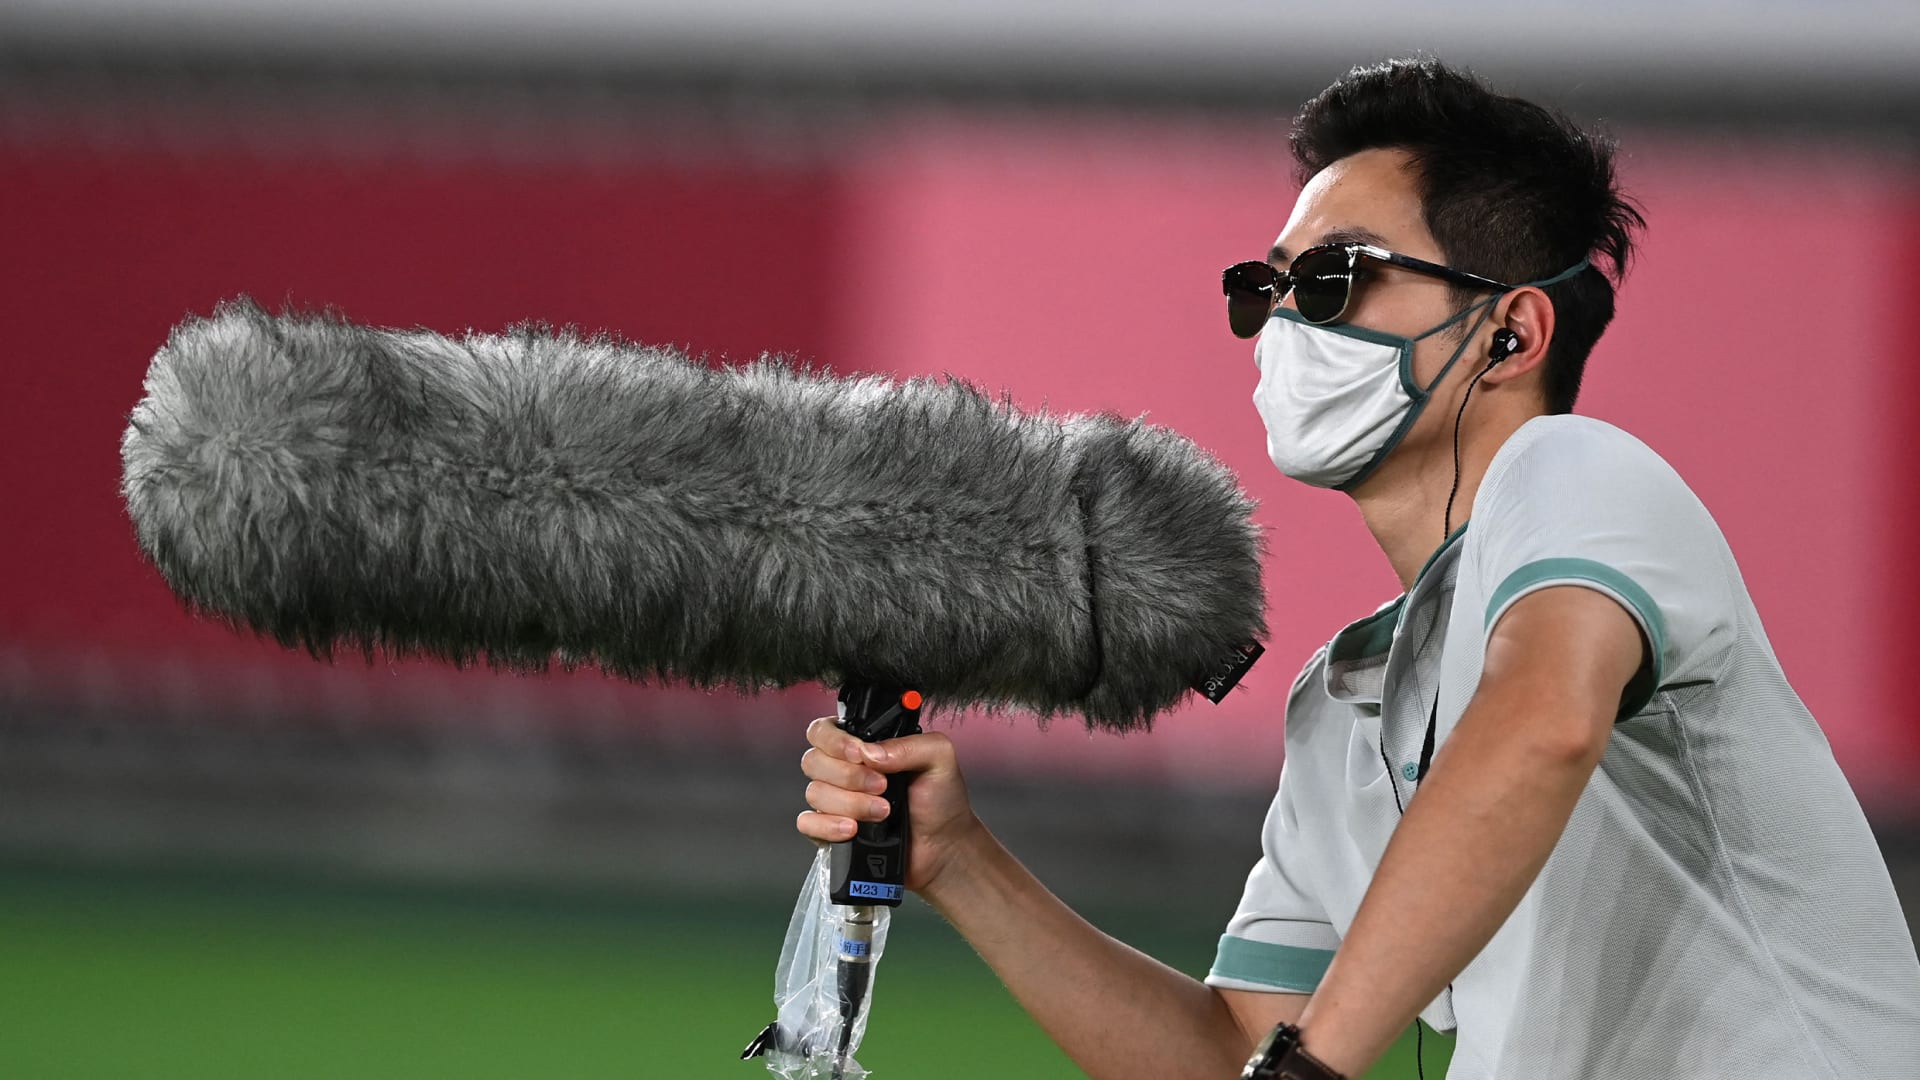 3,600 microphones and counting: The ingenious ways the sound of the Olympics is created